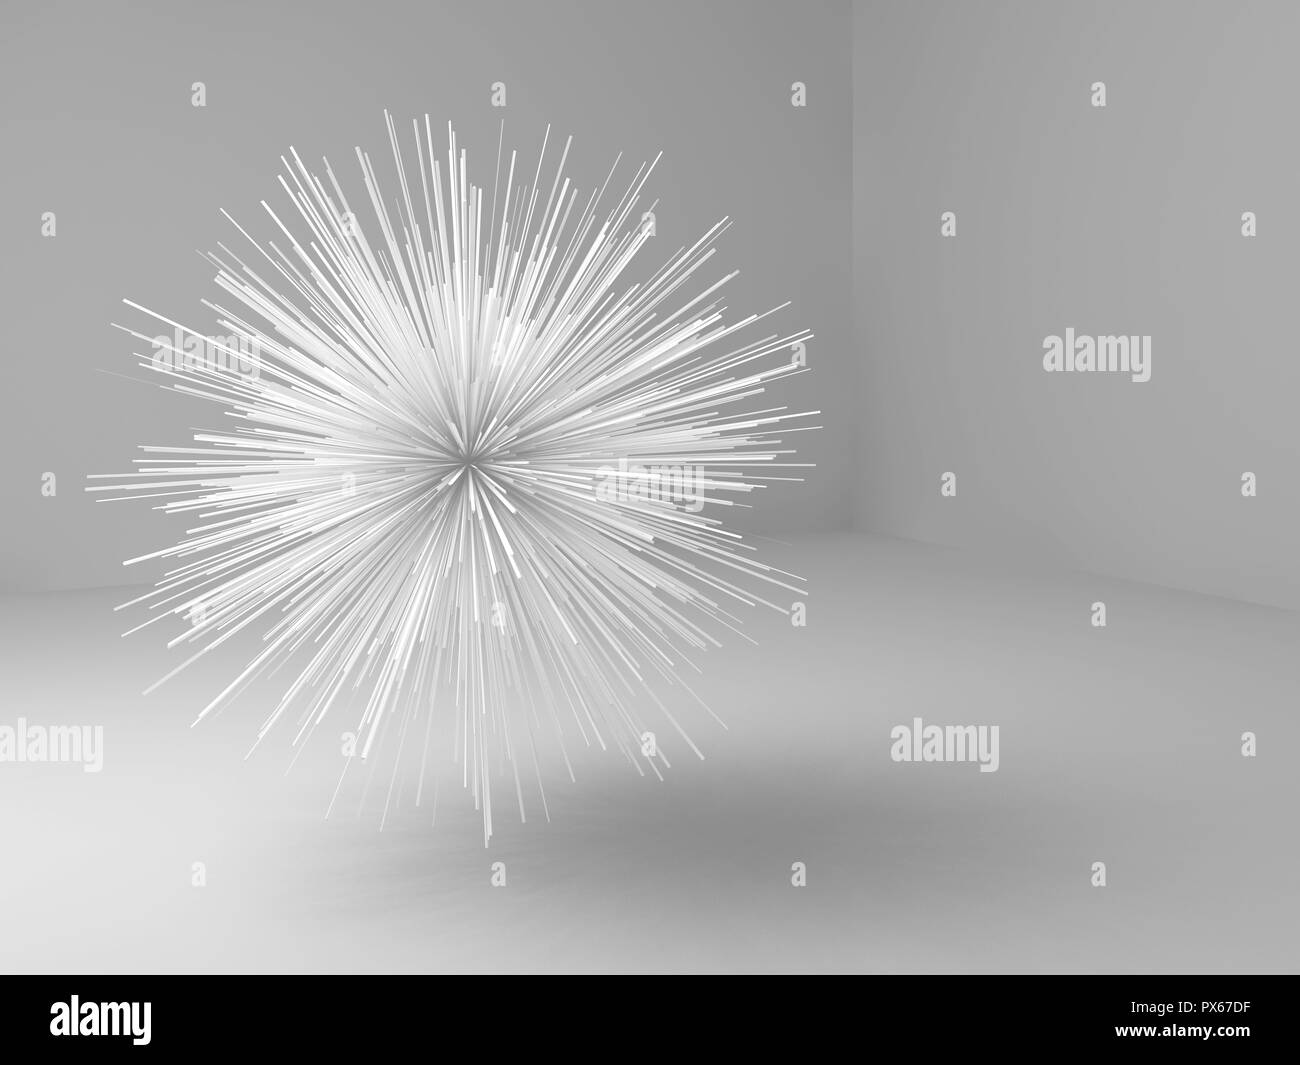 Abstract sharp star shaped object flying in empty white room, 3d illustration Stock Photo